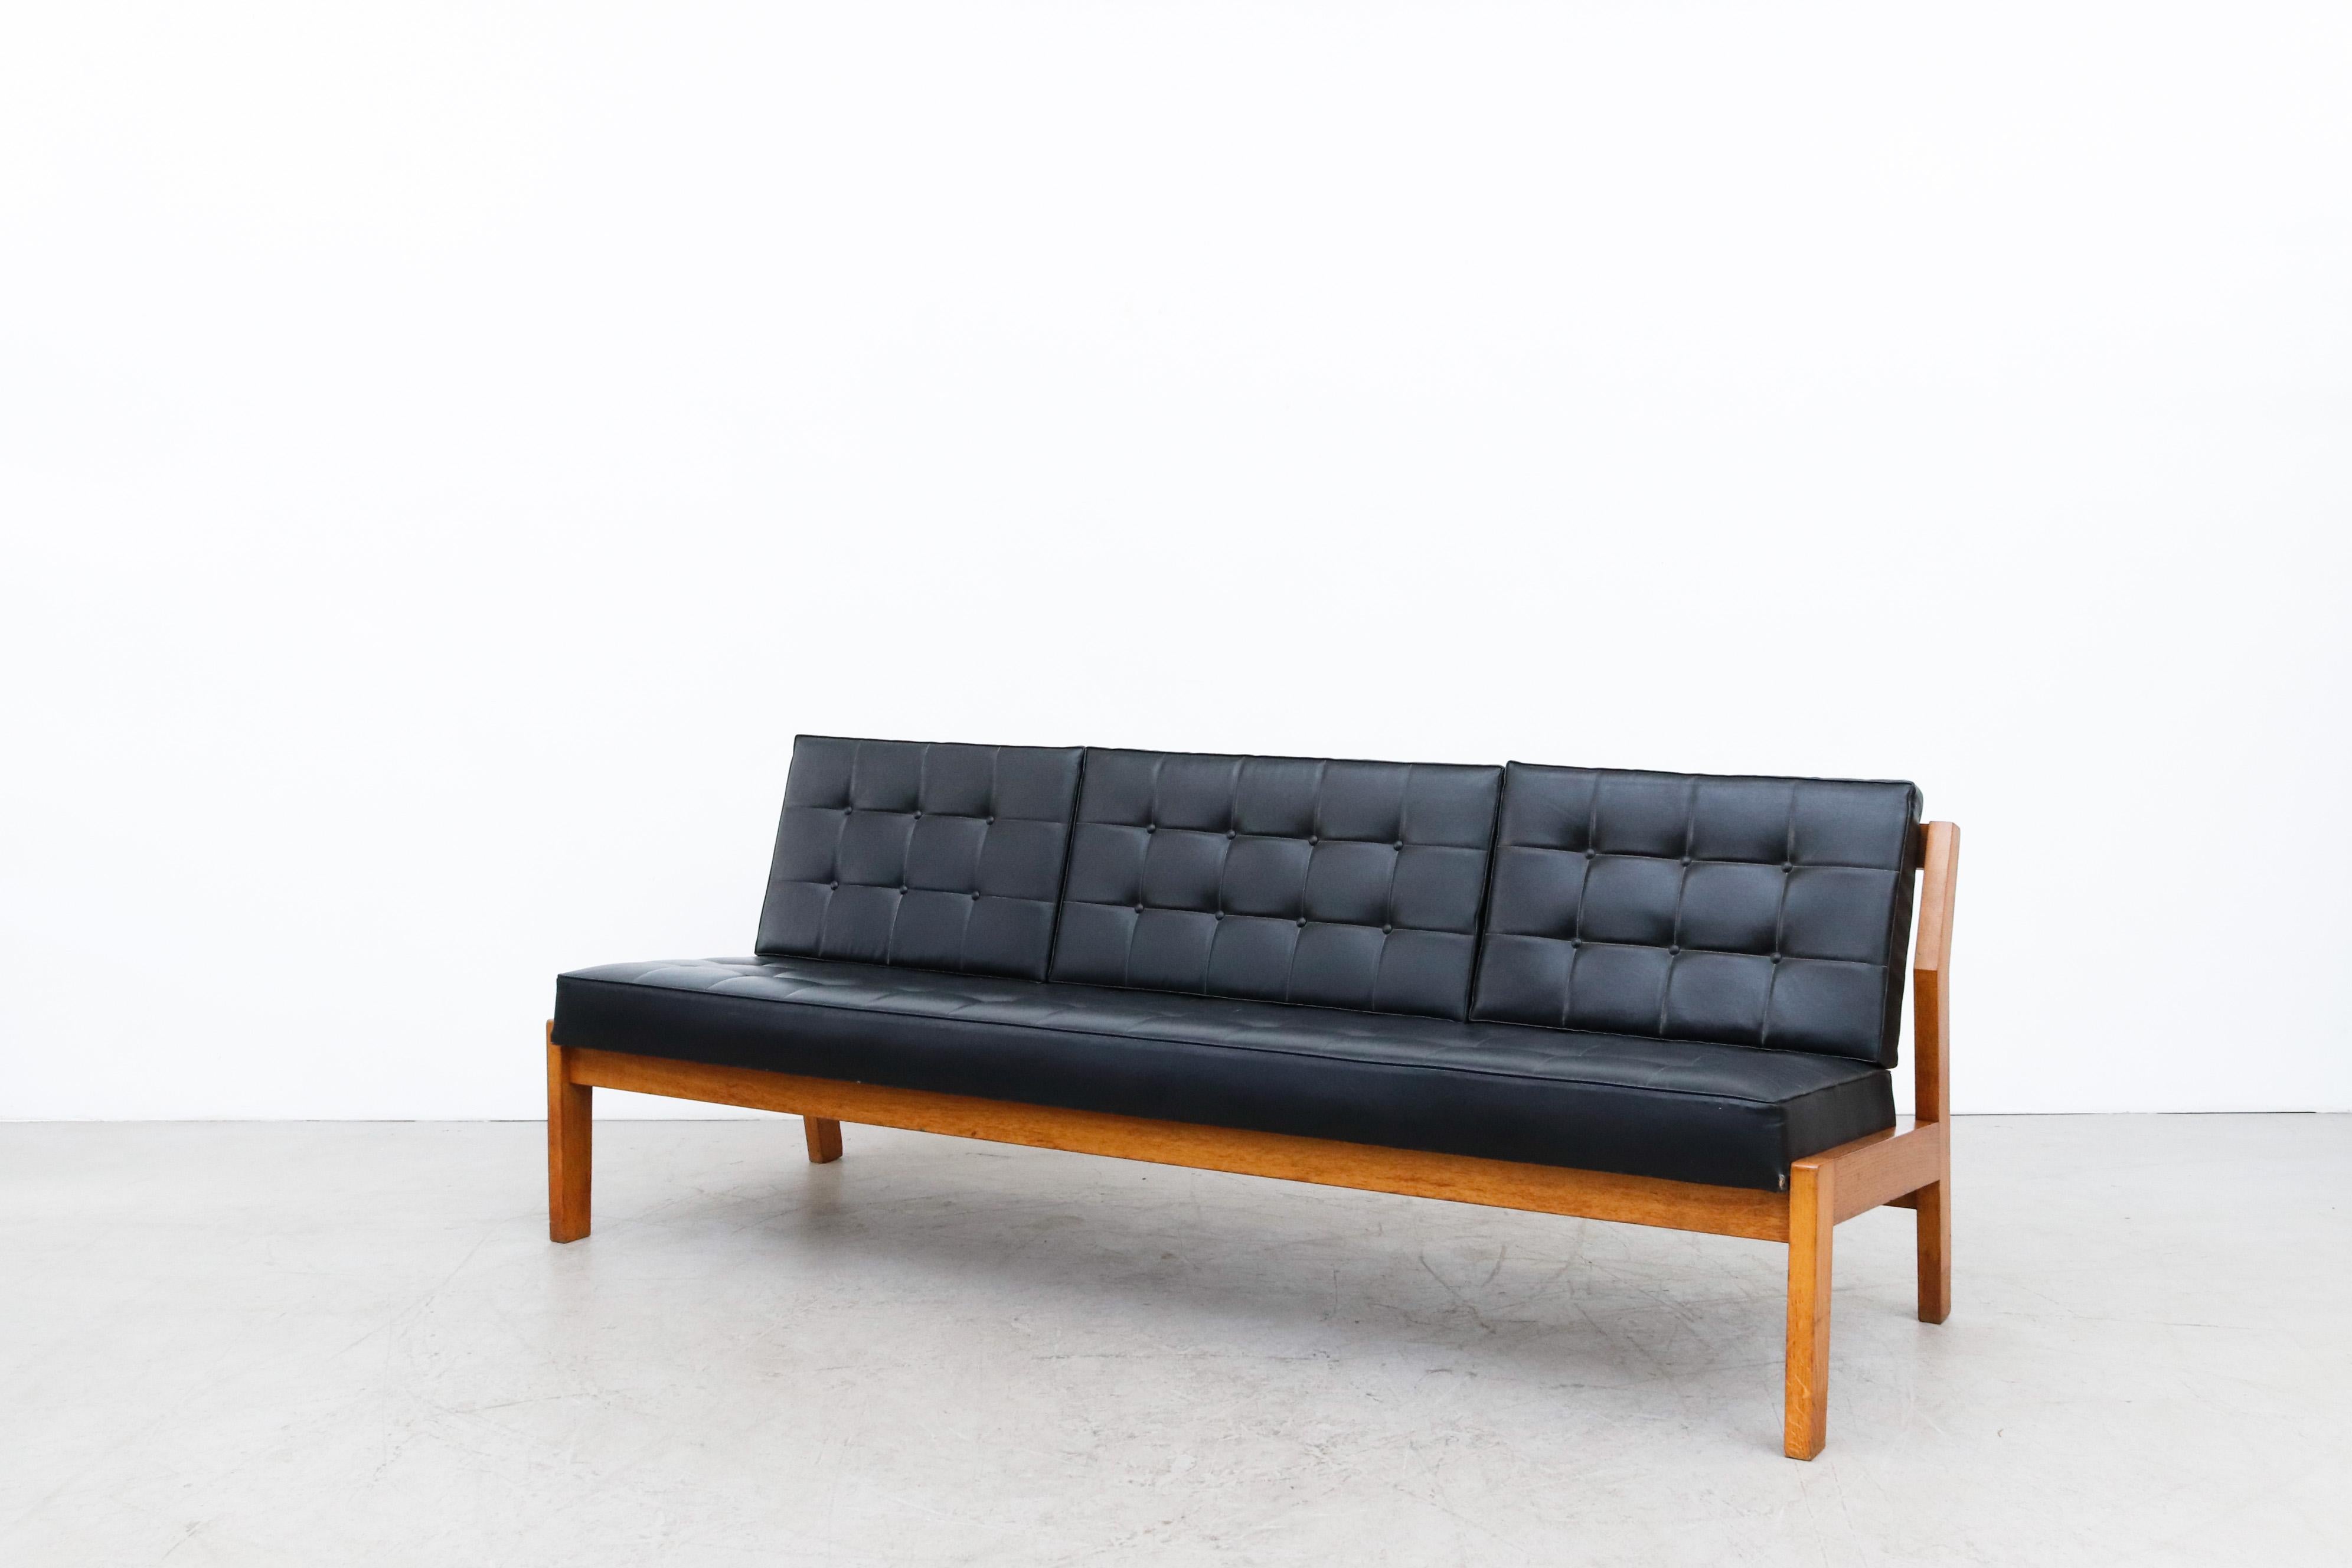 Large armless oak slat bench with original black skai cushion, reminiscent of the J103 Sofa by Børge Mogensen. Can be used with or without back cushions. Beautifully built. Heavy and handsome piece. In original condition with wear consistent with